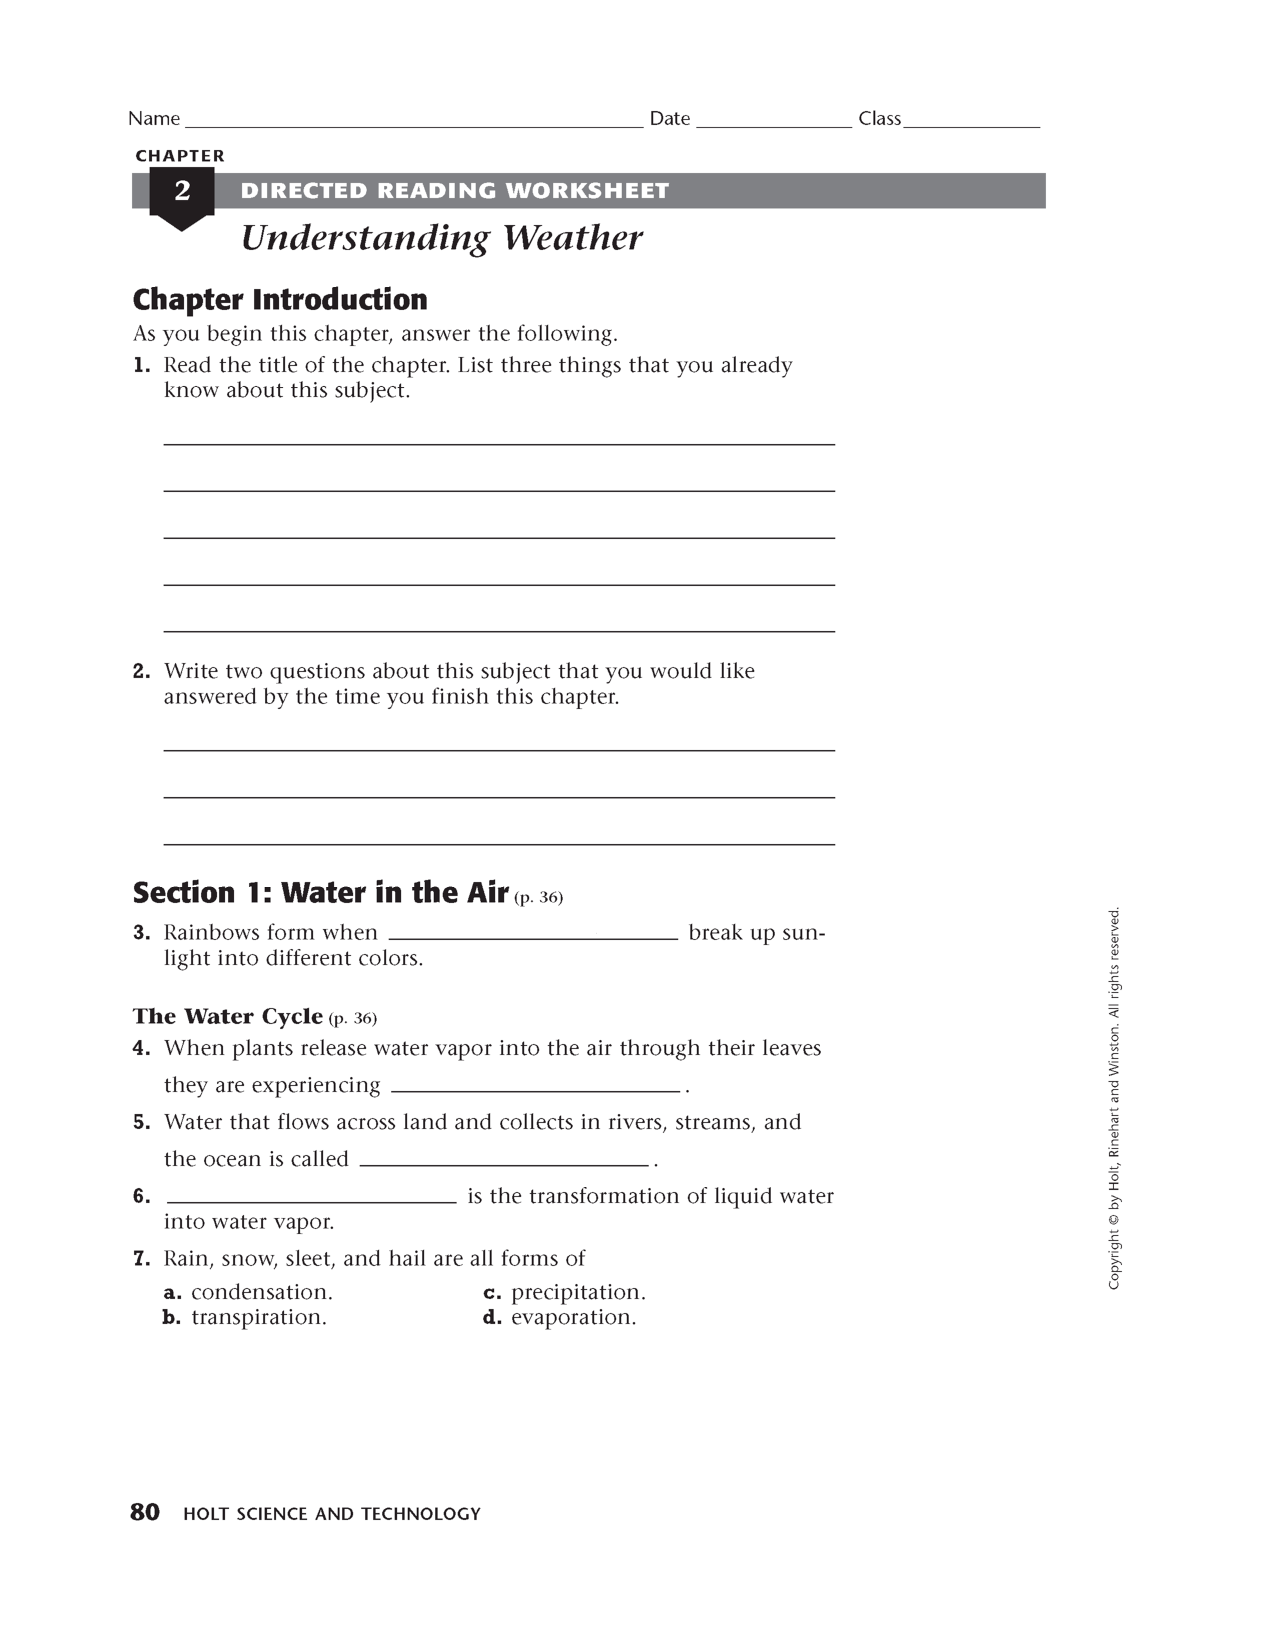 13 Best Images of 7th Grade Life Science Worksheets Free 7th Grade Science Worksheets, 7th